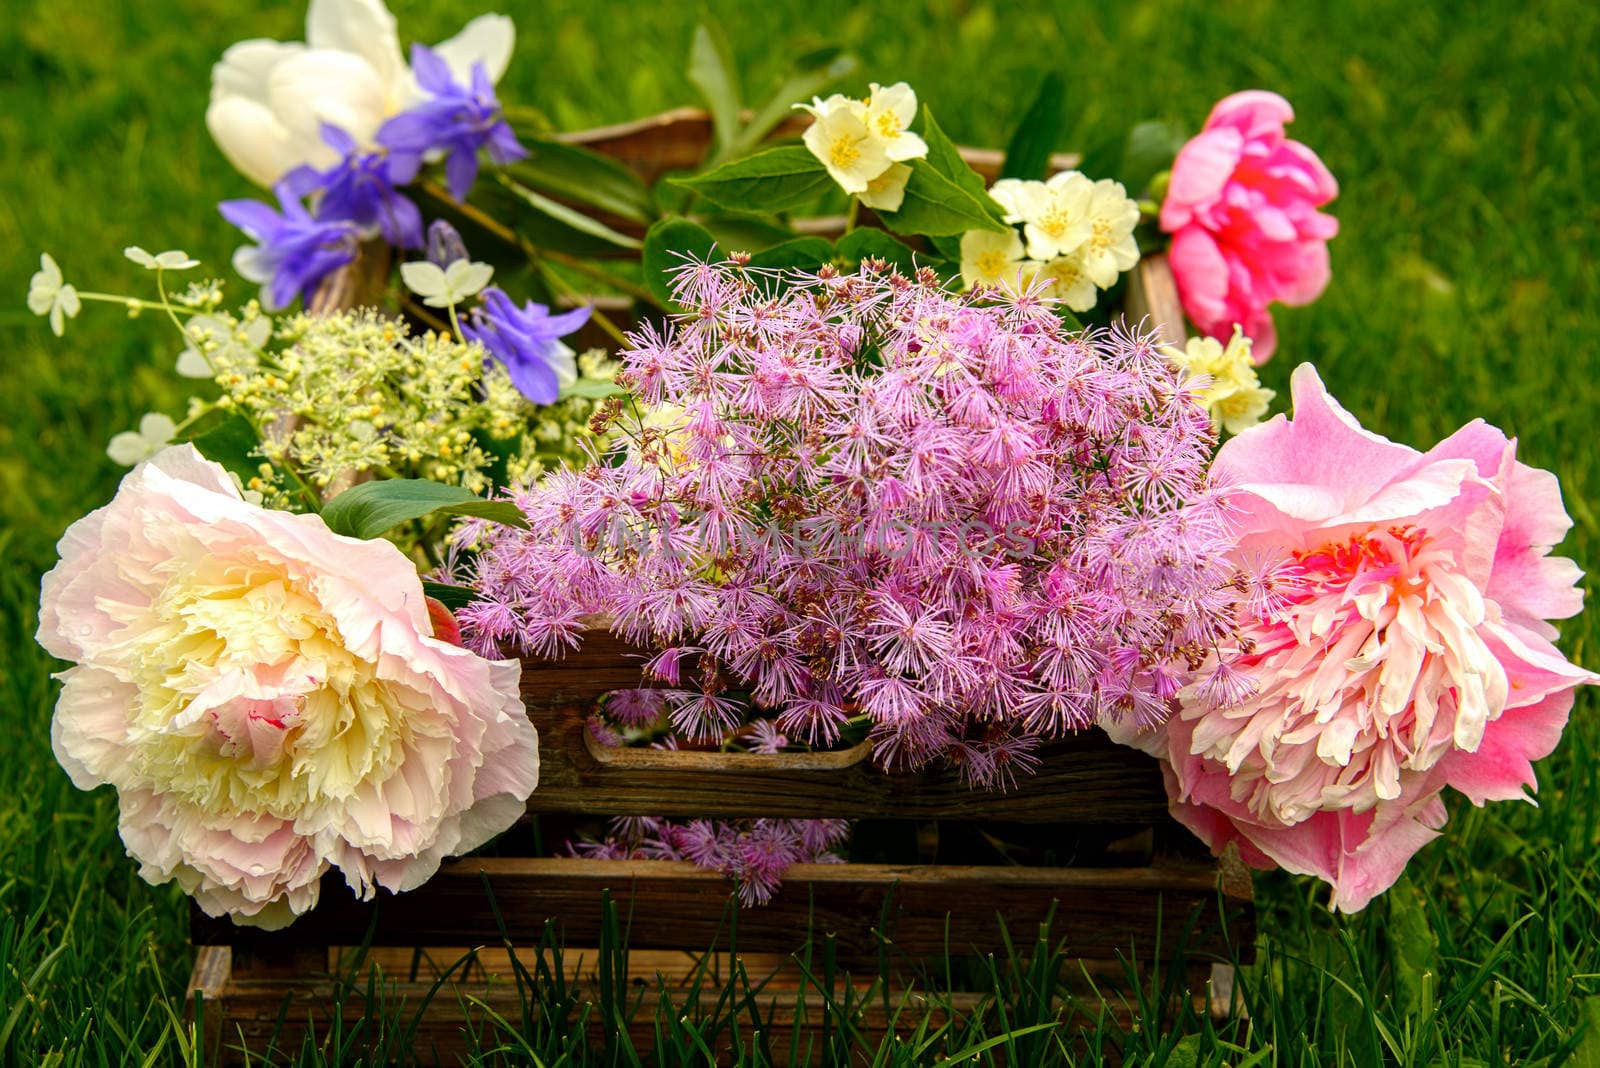 Peonies, Thalictrum, jasmine and aquilegia in a wooden box on grass